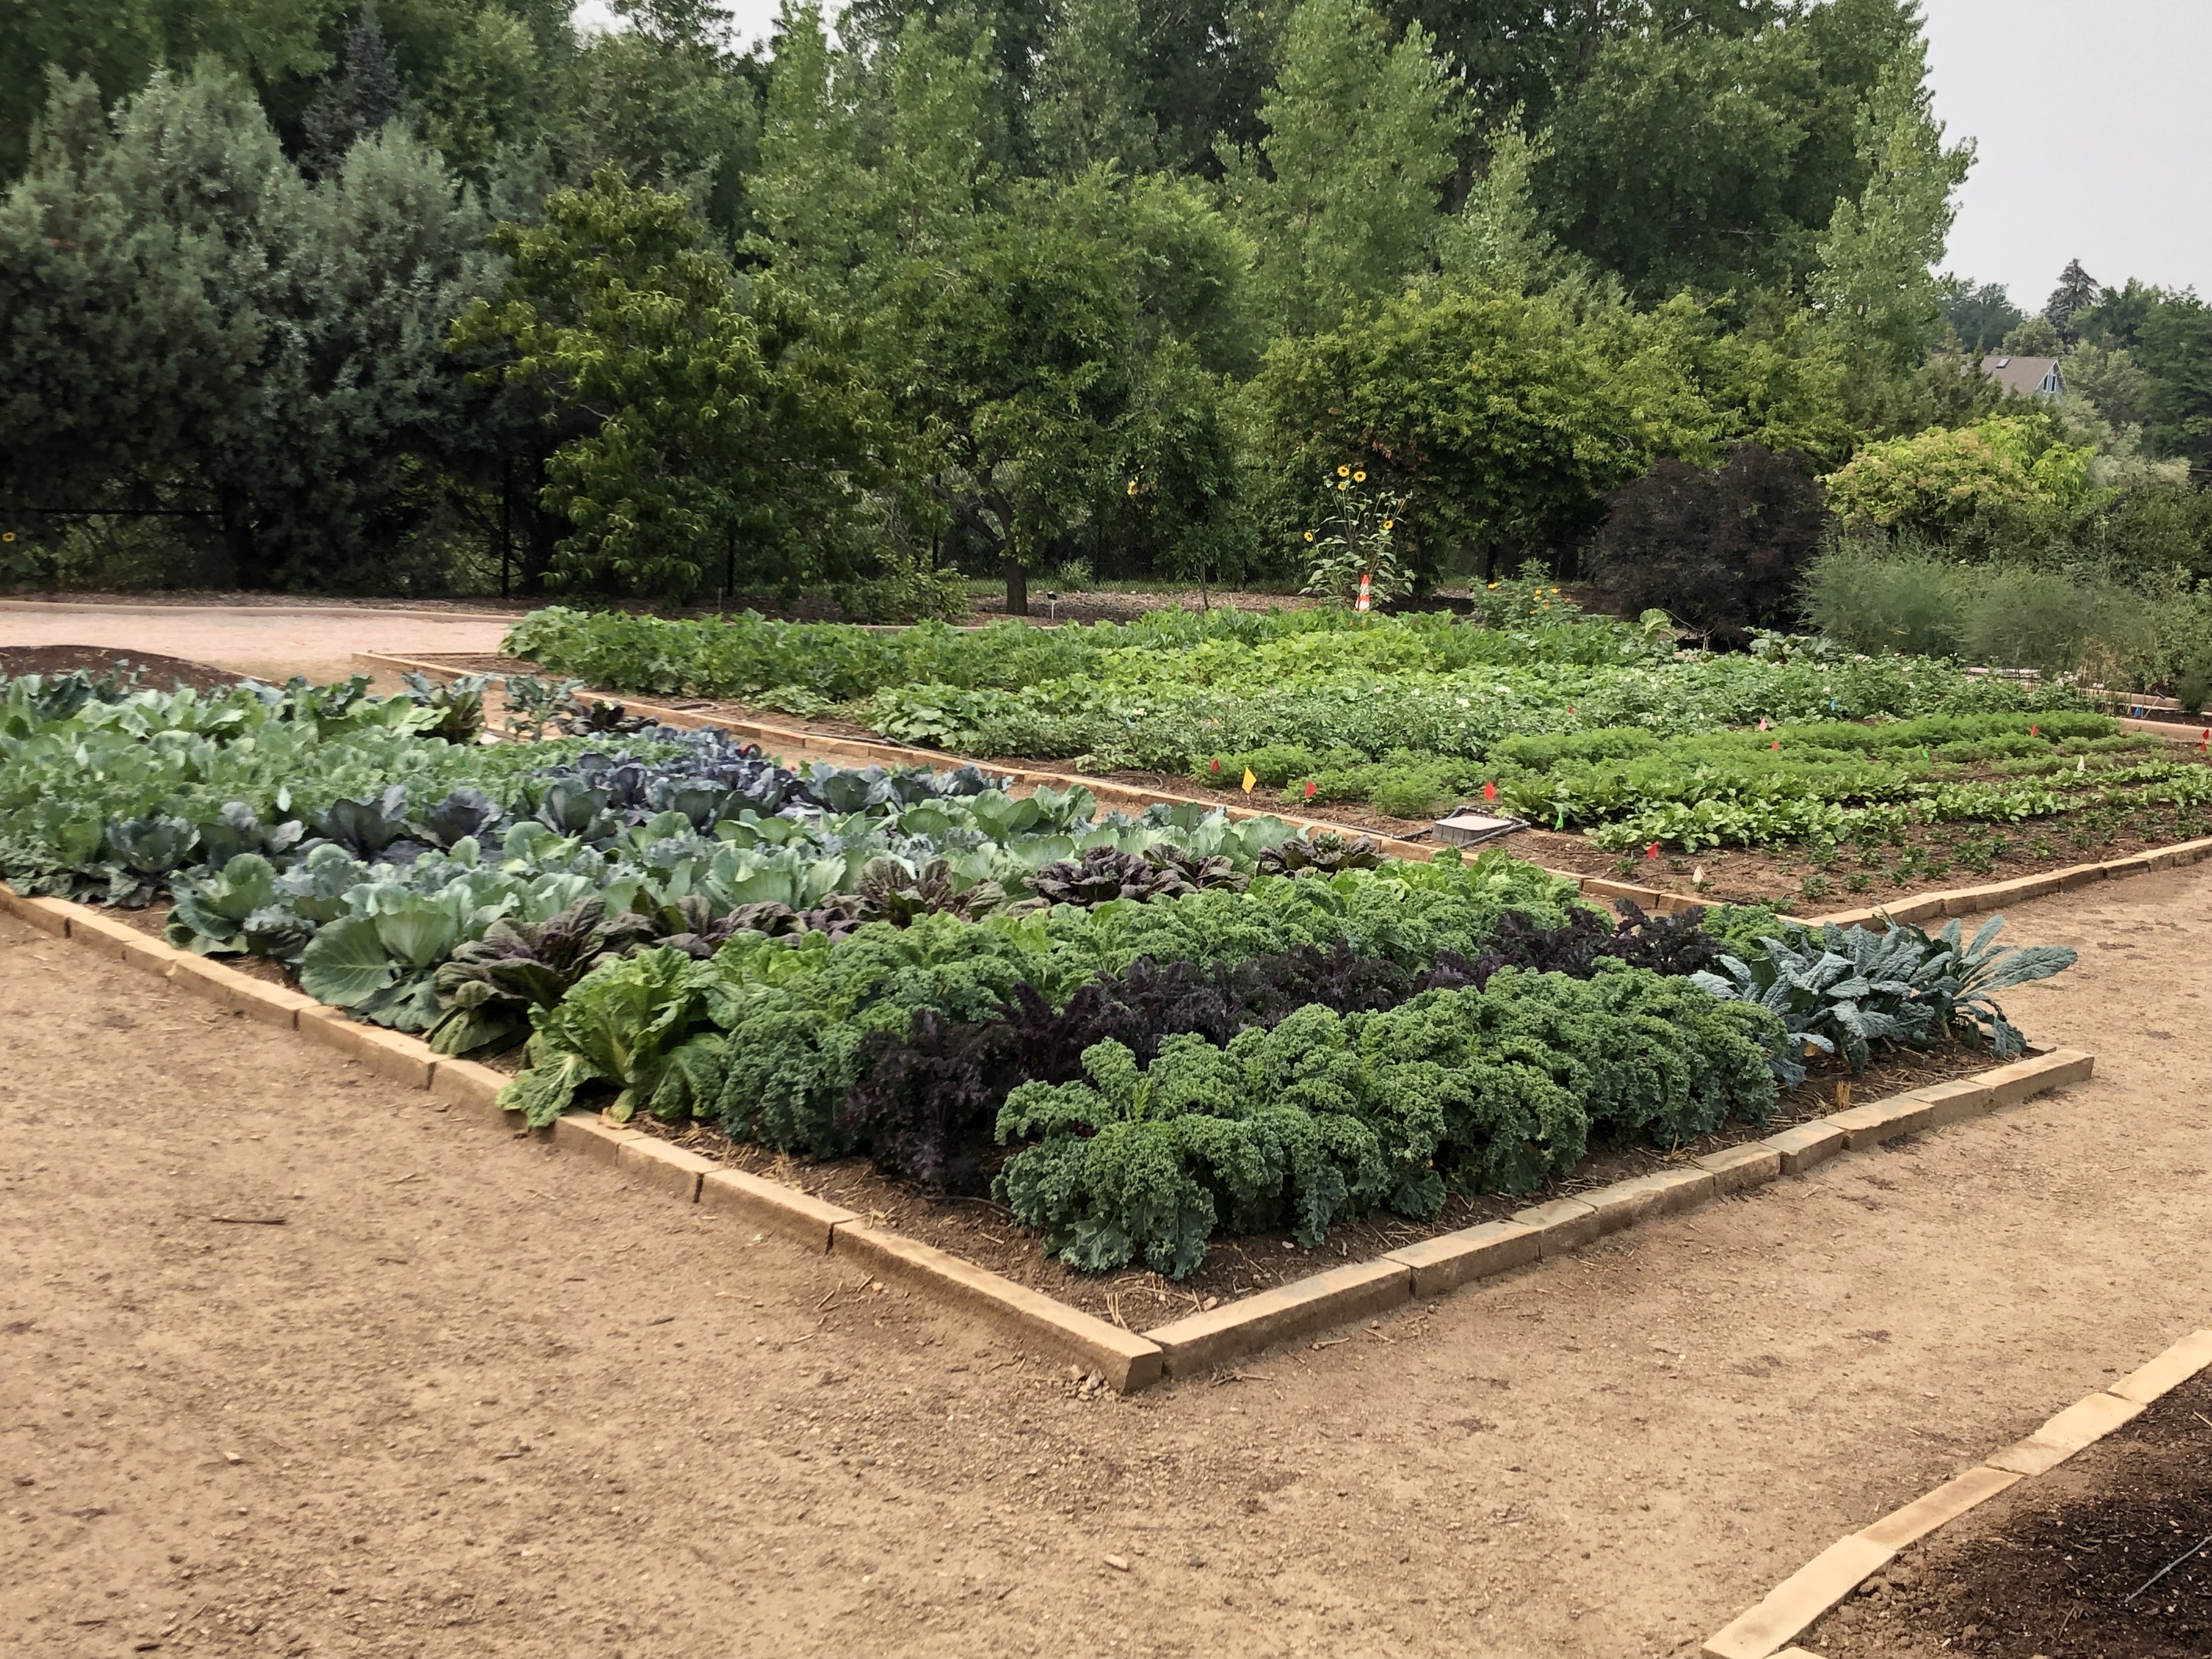 Esther McGinnis, NDSU Extension horticulturist, details the social, psychological, and health benefits of home and community gardening. (NDSU photo)